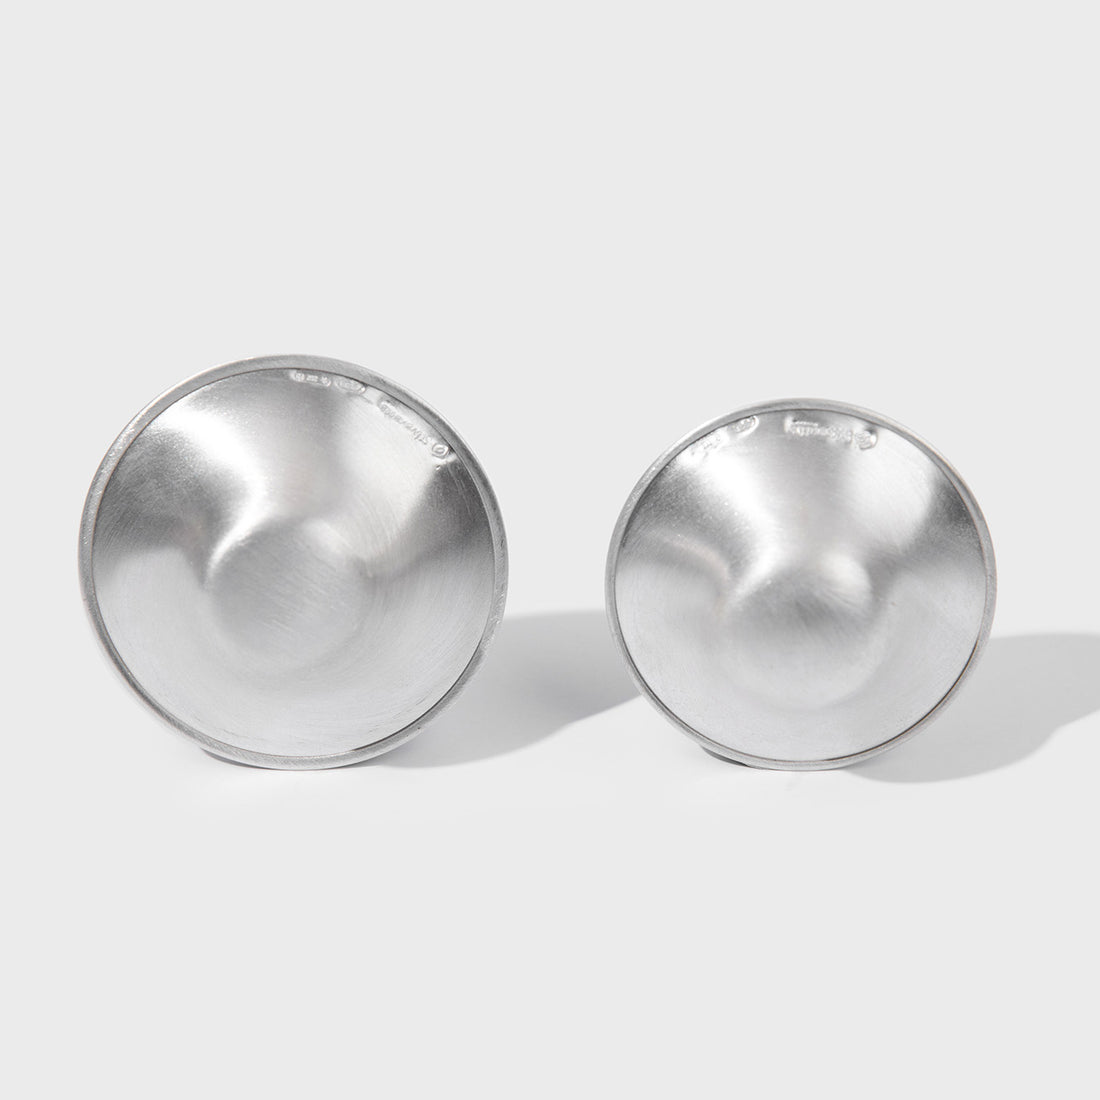 The Original Silverette Silver Nursing Cups - Size XL - Soothe and Protect Your Nursing Nipples